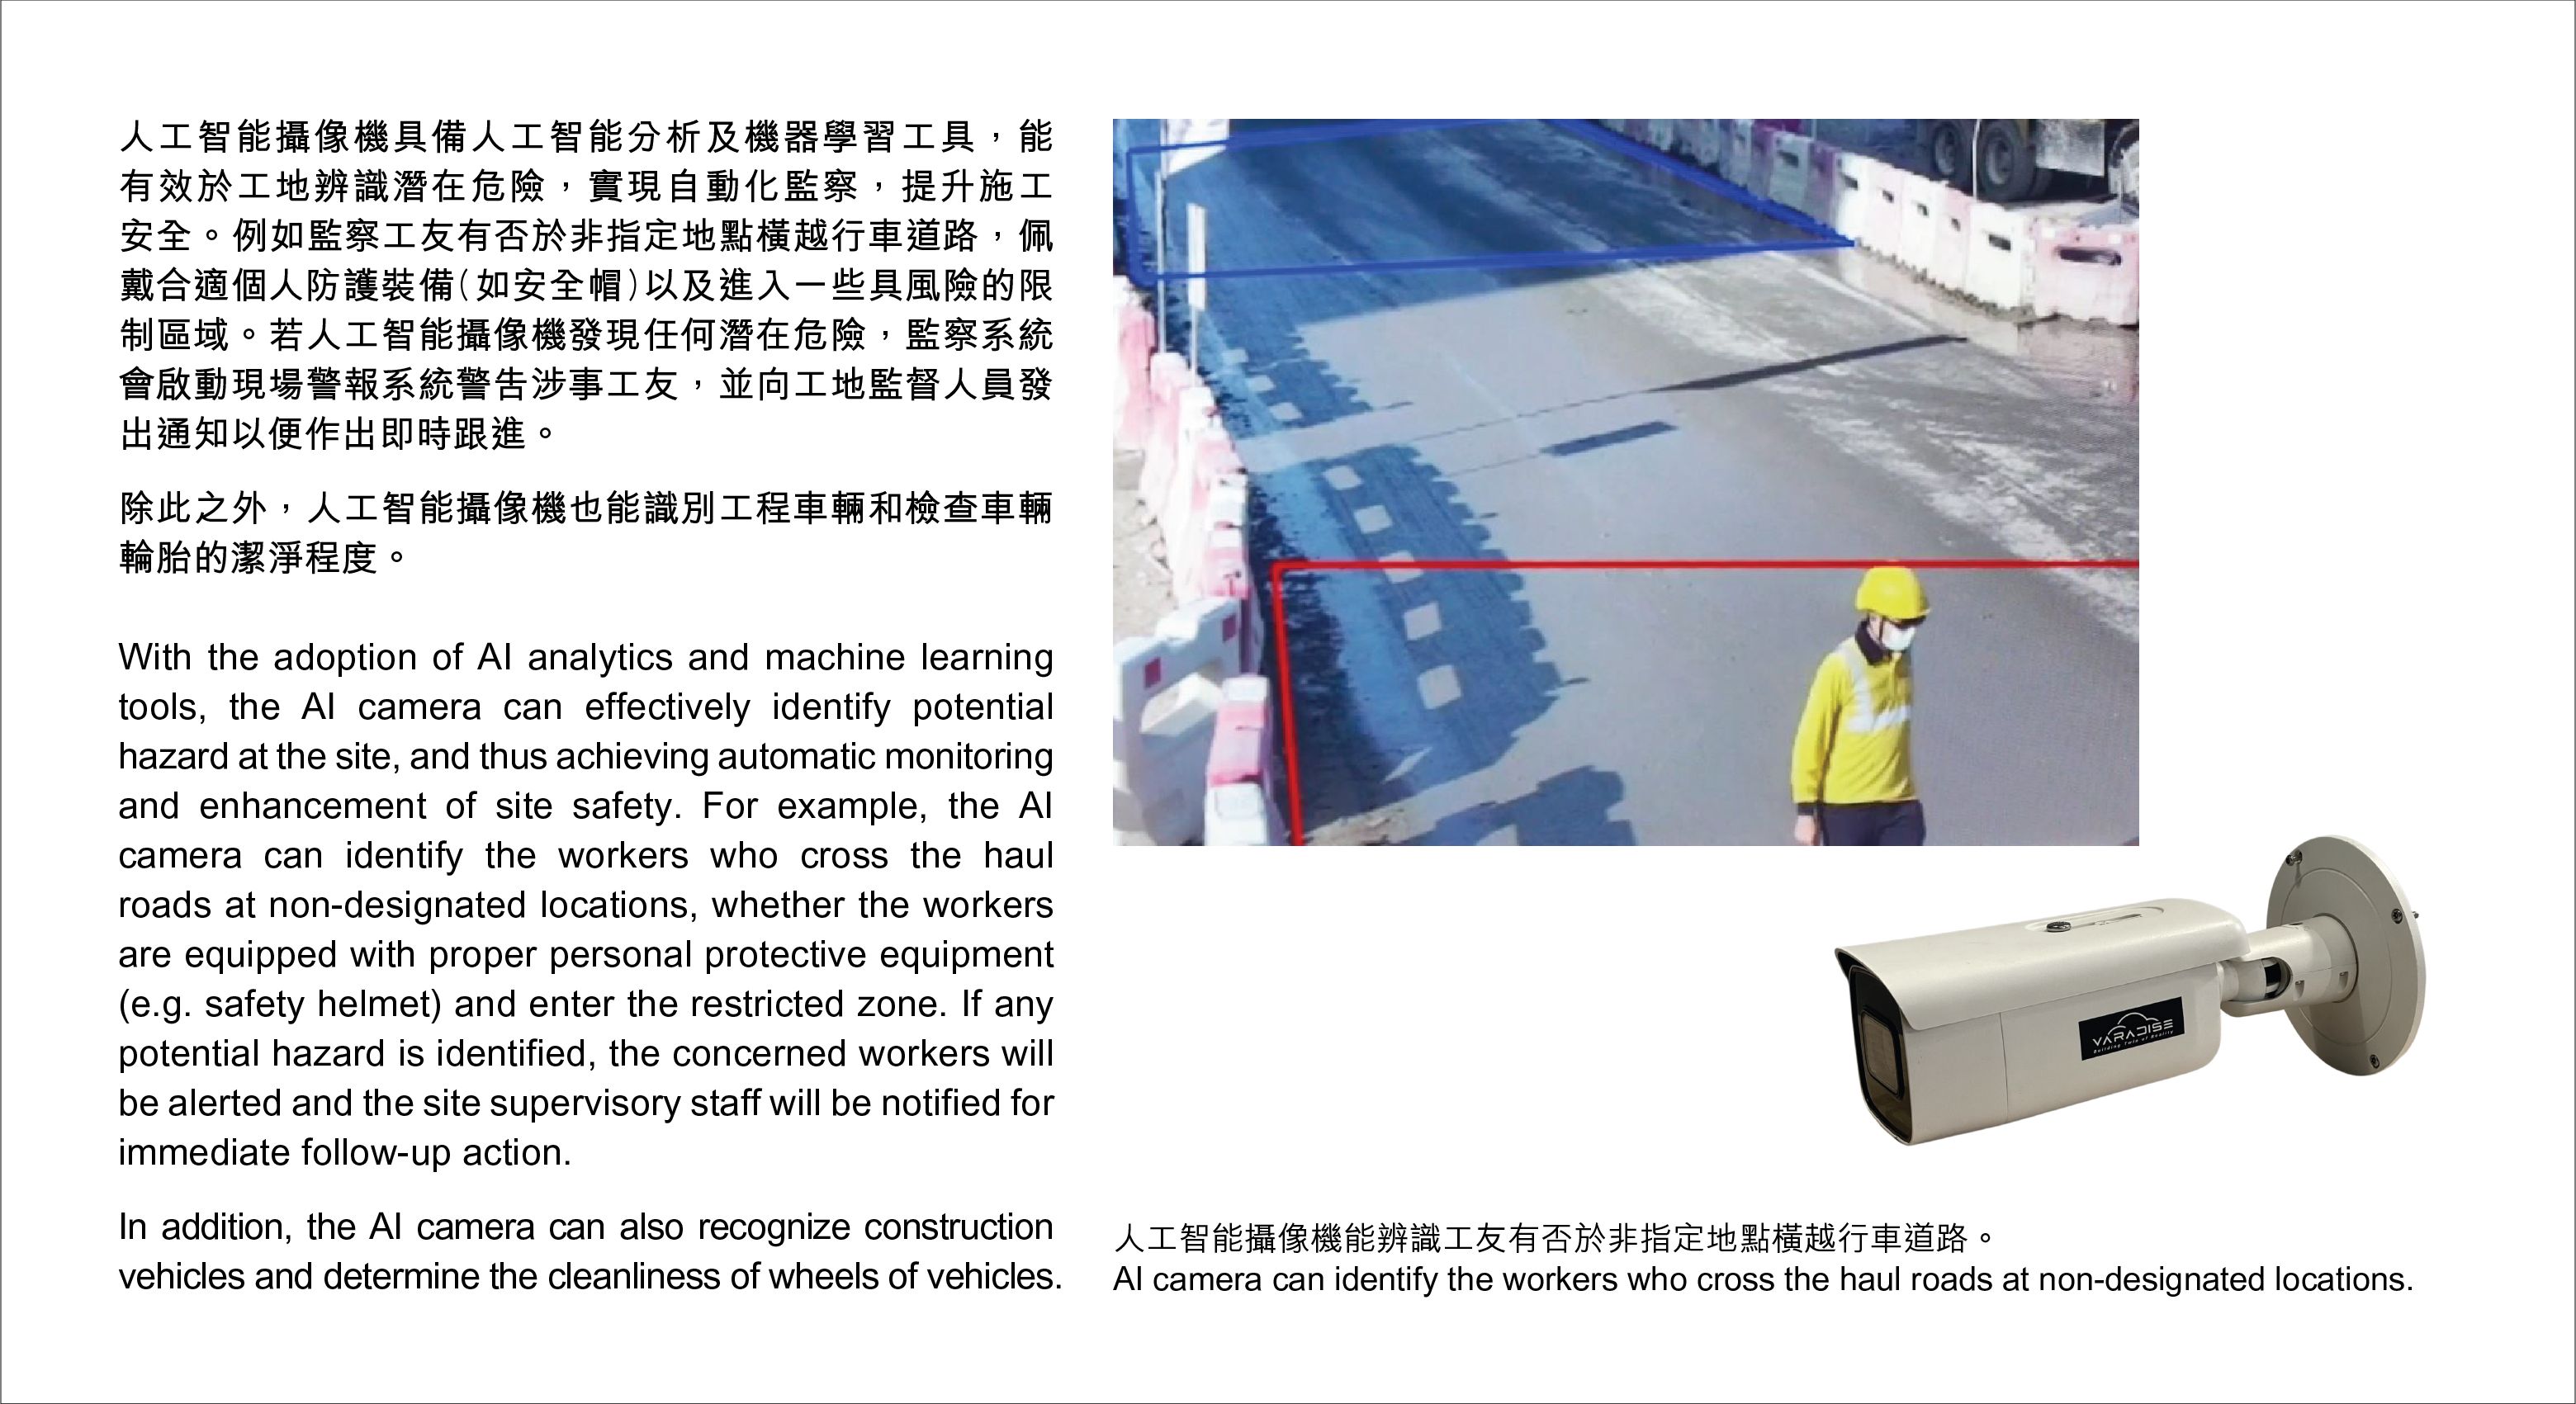 With the adoption of AI analytics and machine learning tools, the AI camera can effectively identify potential  hazard at the site, and thus achieving automatic monitoring and enhancement of site safety. For example, the AI camera can identify the workers who cross the haul roads at non-designated locations, whether the workers are equipped with proper personal protective equipment (e.g. safety helmet) and enter the restricted zone. If any potential hazard is identified, the concerned workers will be alerted and the site supervisory staff will be notified for immediate follow-up action.In addition, the AI camera can also recognize construction vehicles and determine the cleanliness of wheels of vehicles.